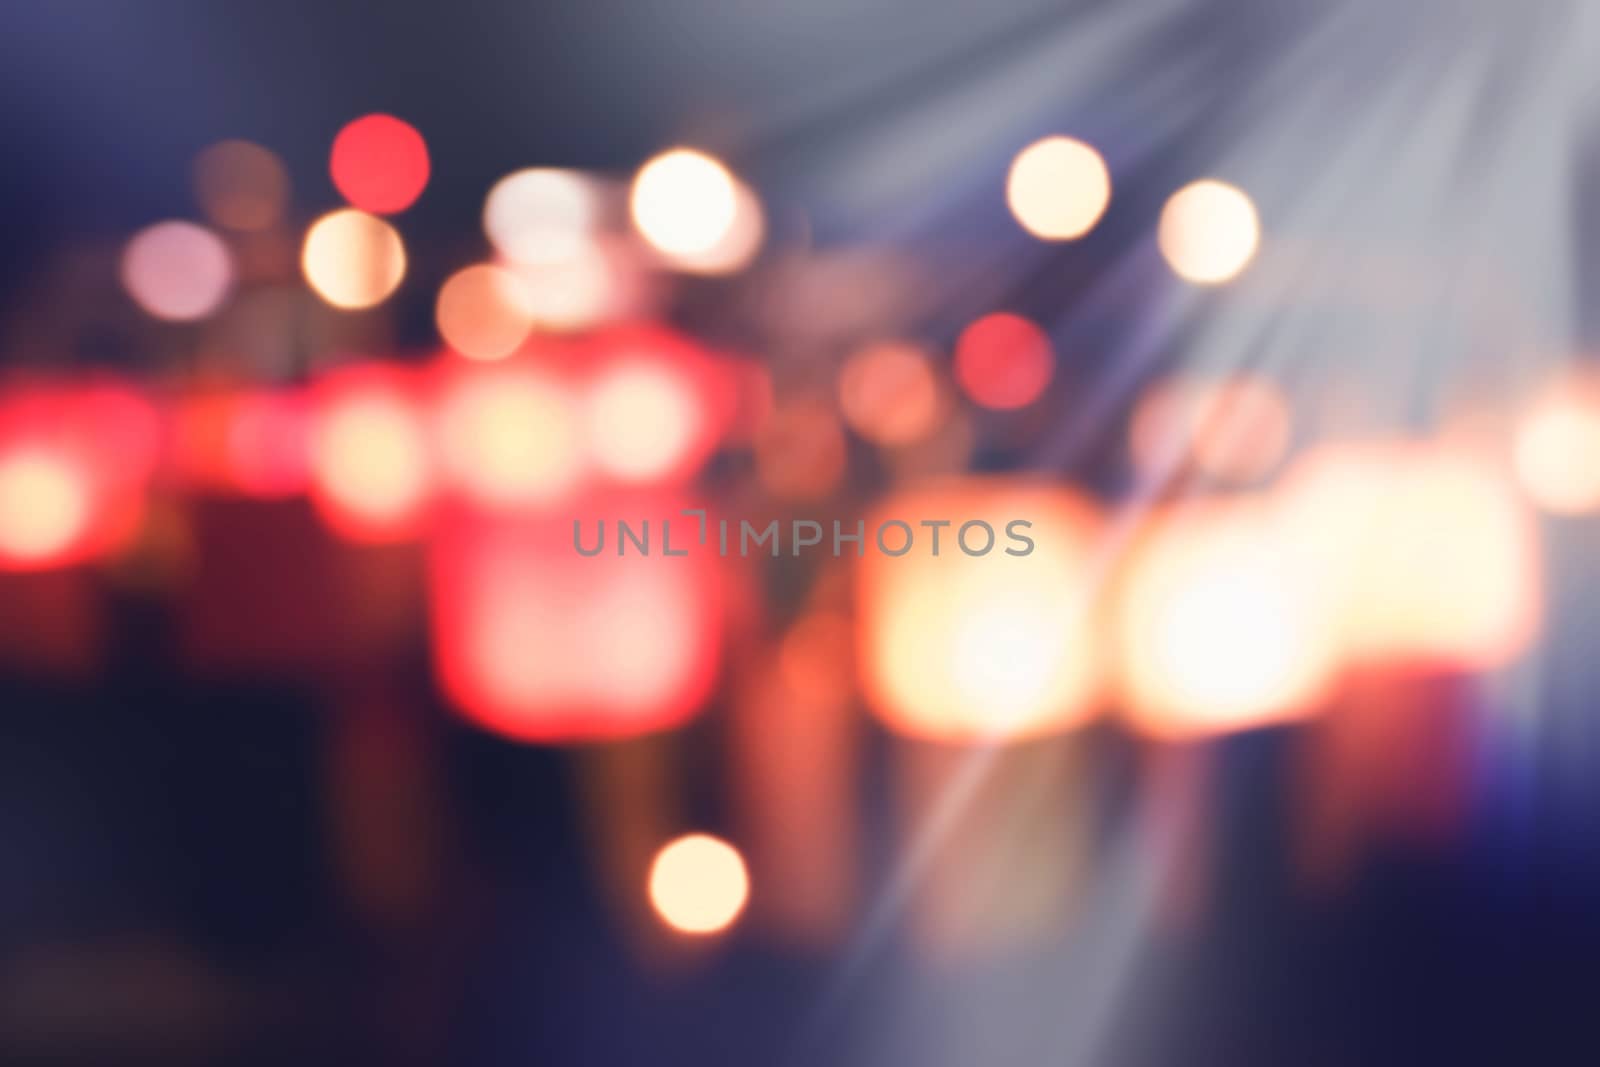 abstract natural blur background,  Asymmetric light rays by teerawit